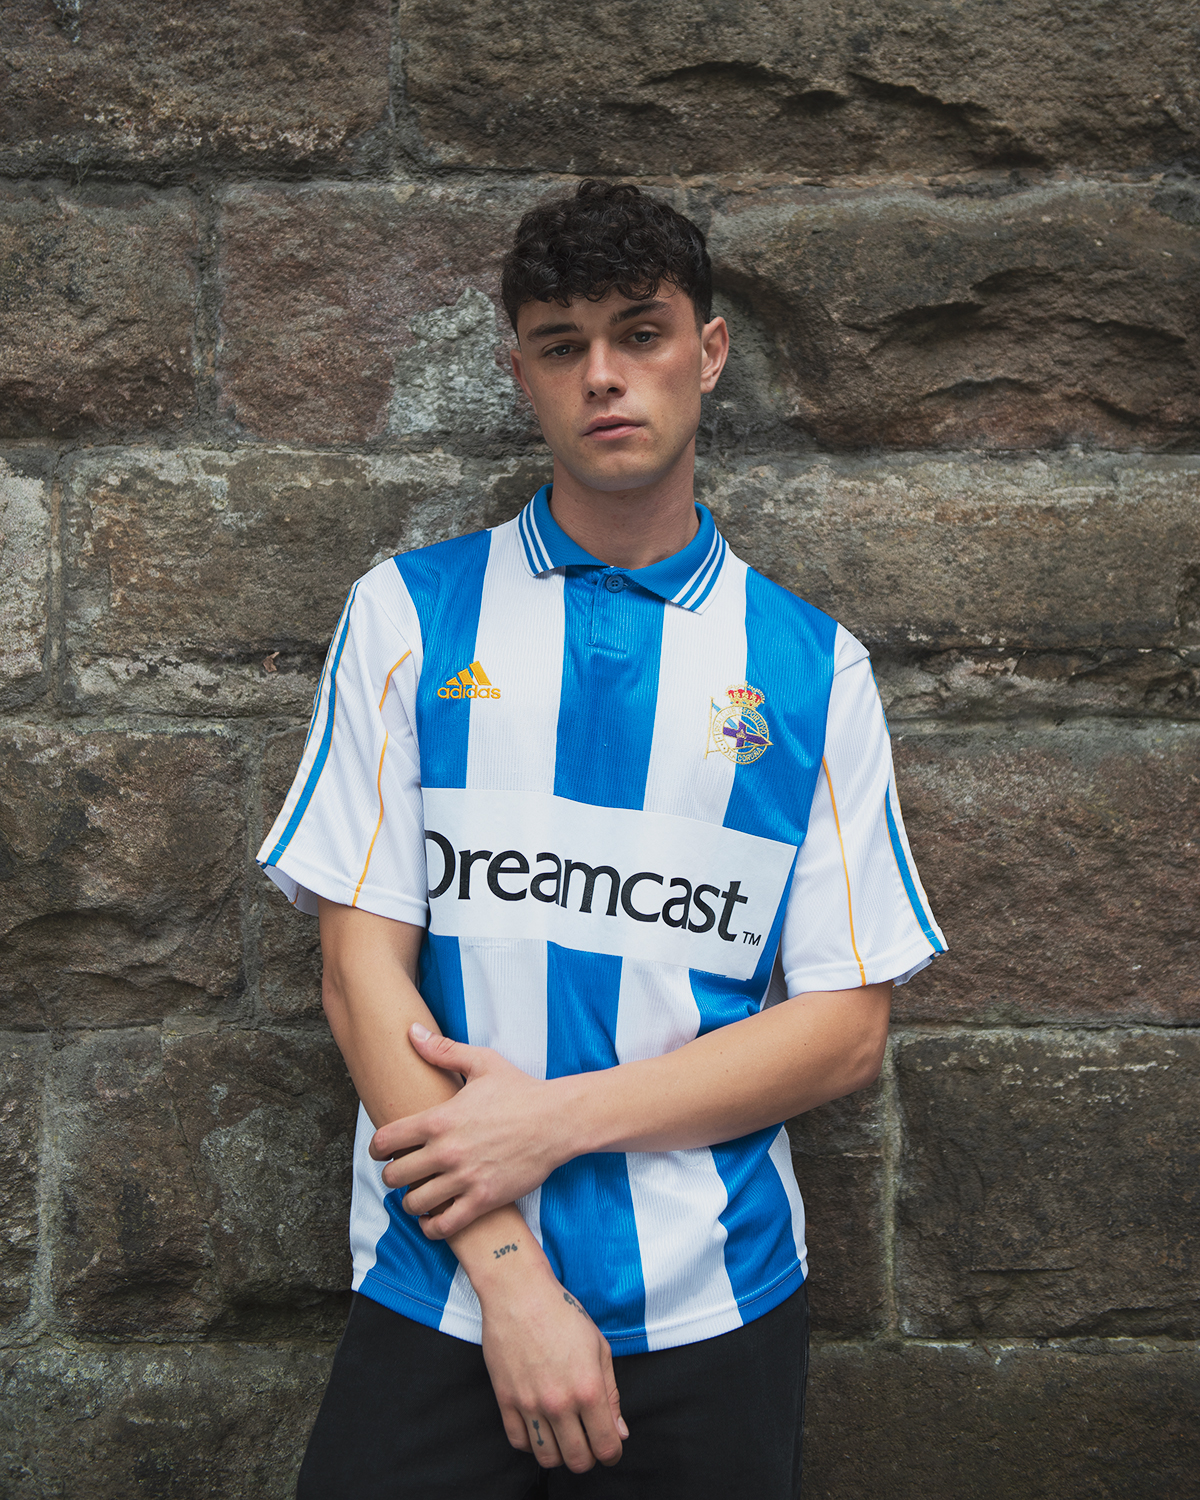 Classic Football Shirts on Twitter: "Deportivo La Coruña 2000 Home by Adidas 🇪🇸 the stunning Dreamcast sponsor! Dropping on the on Thursday in a size Medium. https://t.co/ztO156i37d" / Twitter